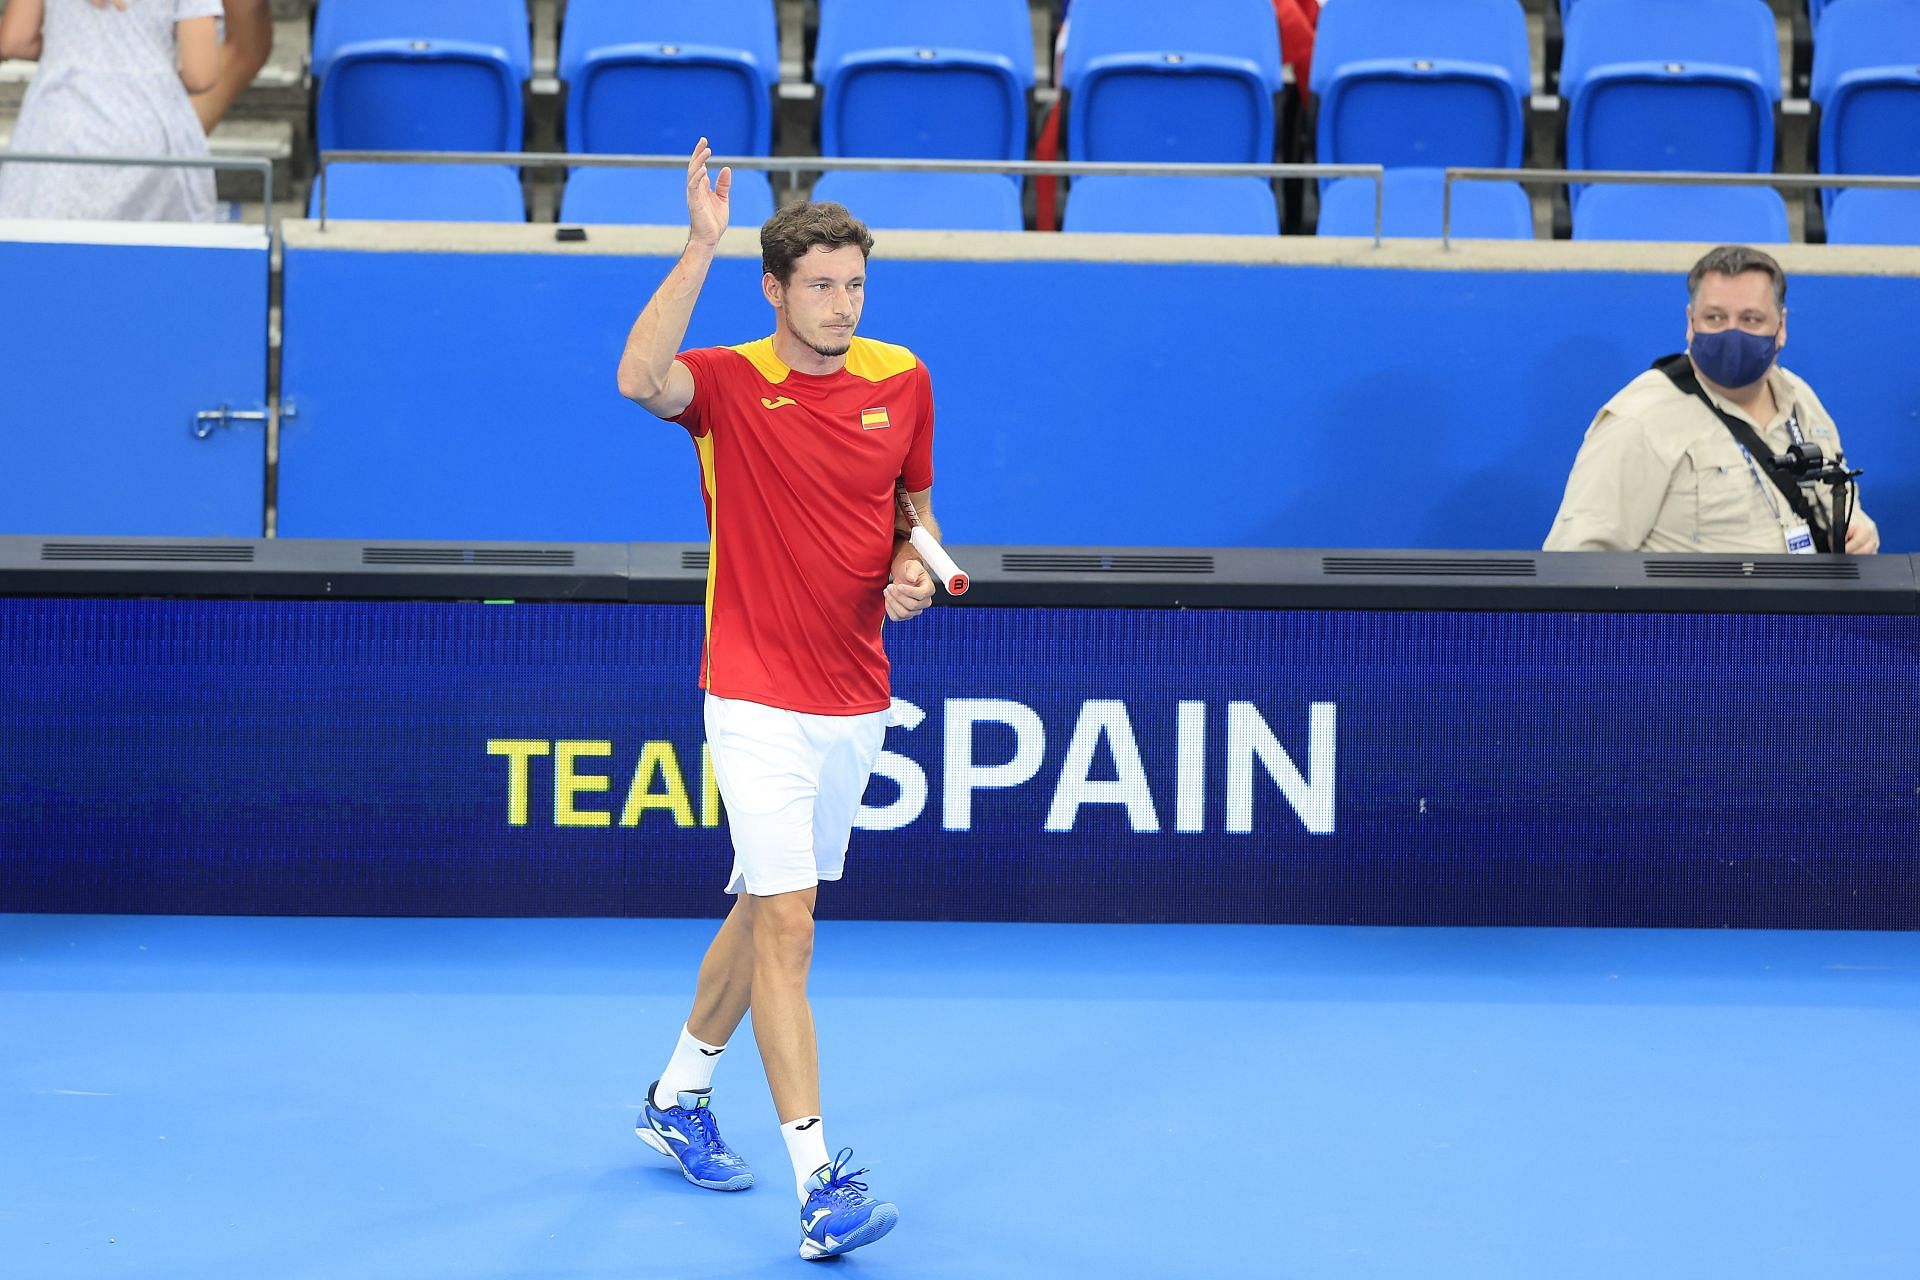 Spain ended Day 1 of the ATP Cup 2022 as the leaders of Group A